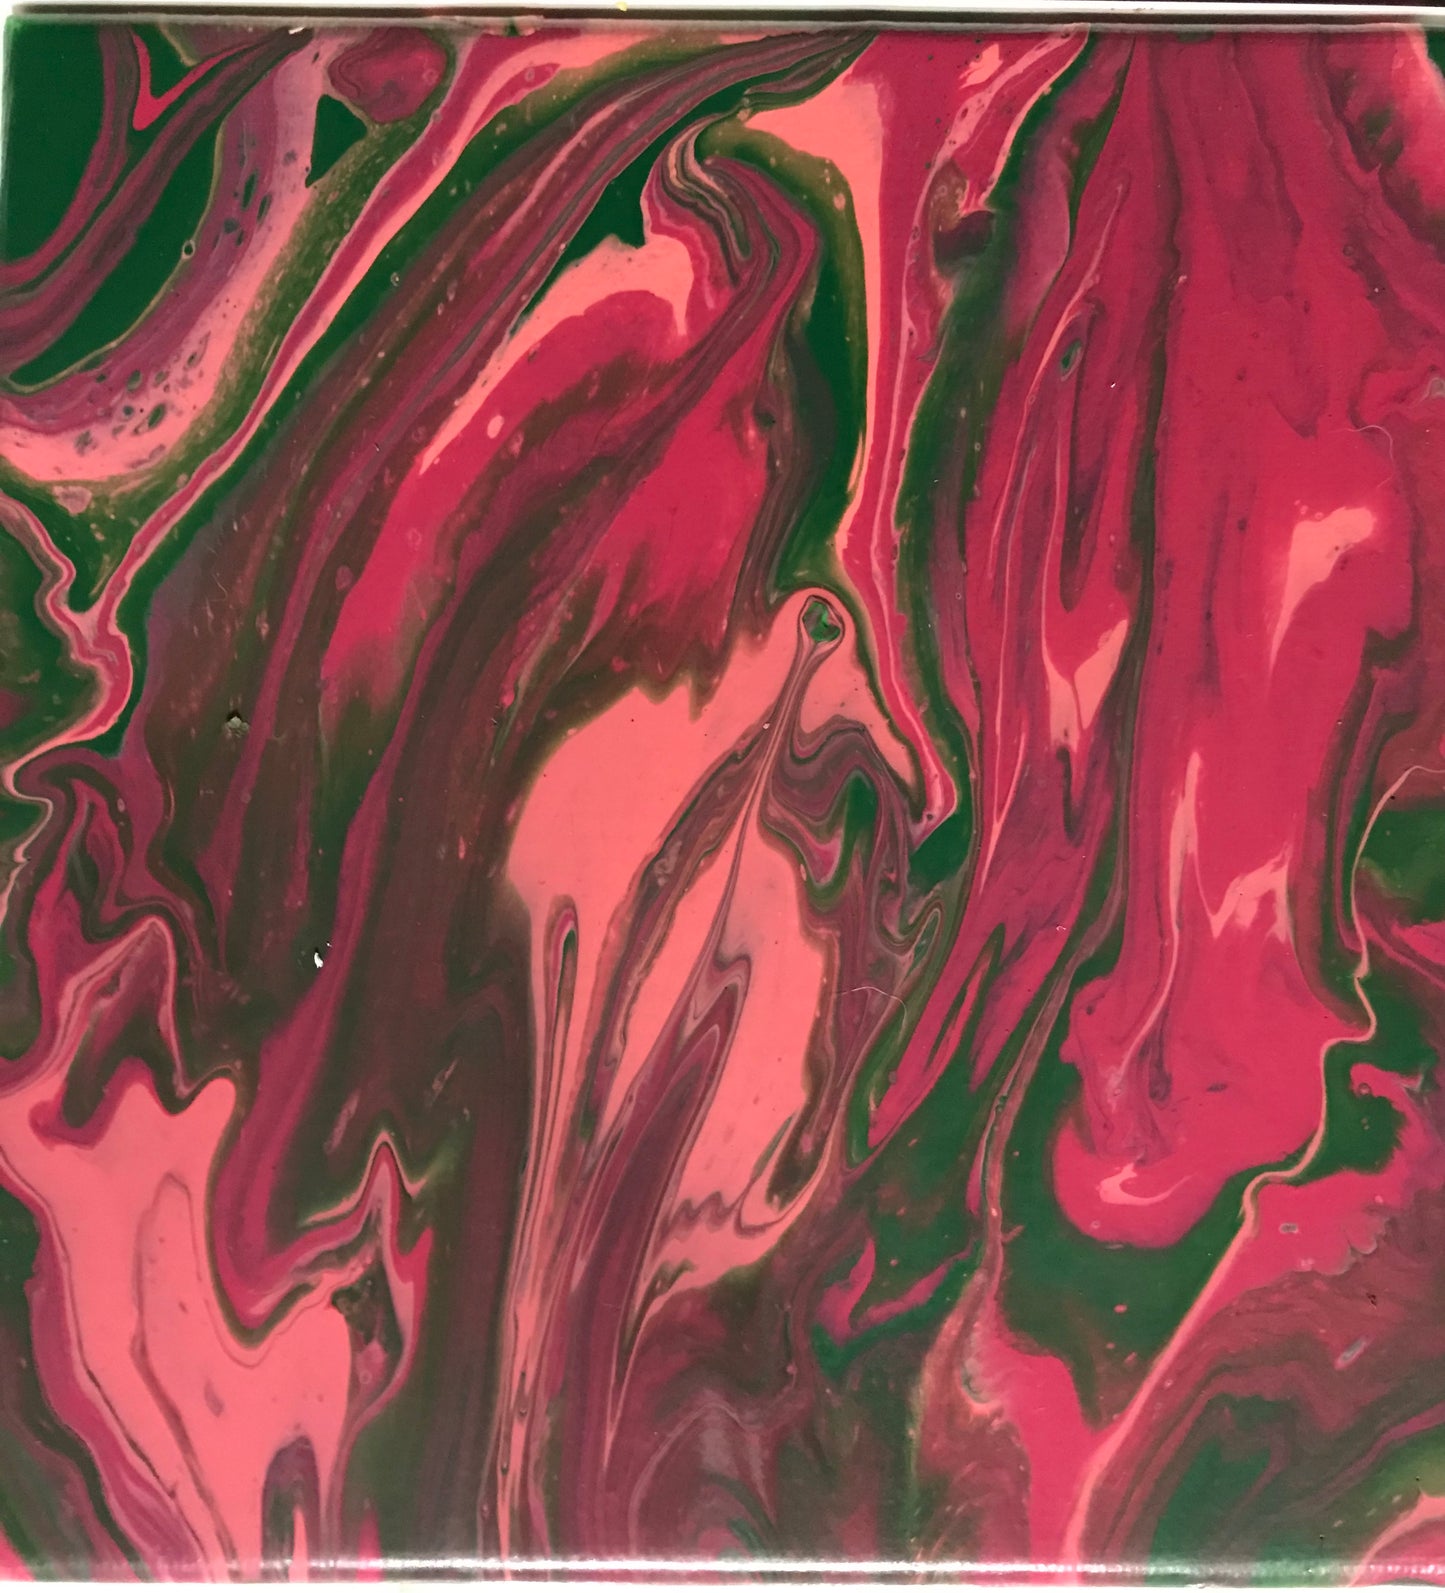 Wed, Oct 26th, 4-6P “Art & Science: Acrylic Pour” Public Houston Painting Class